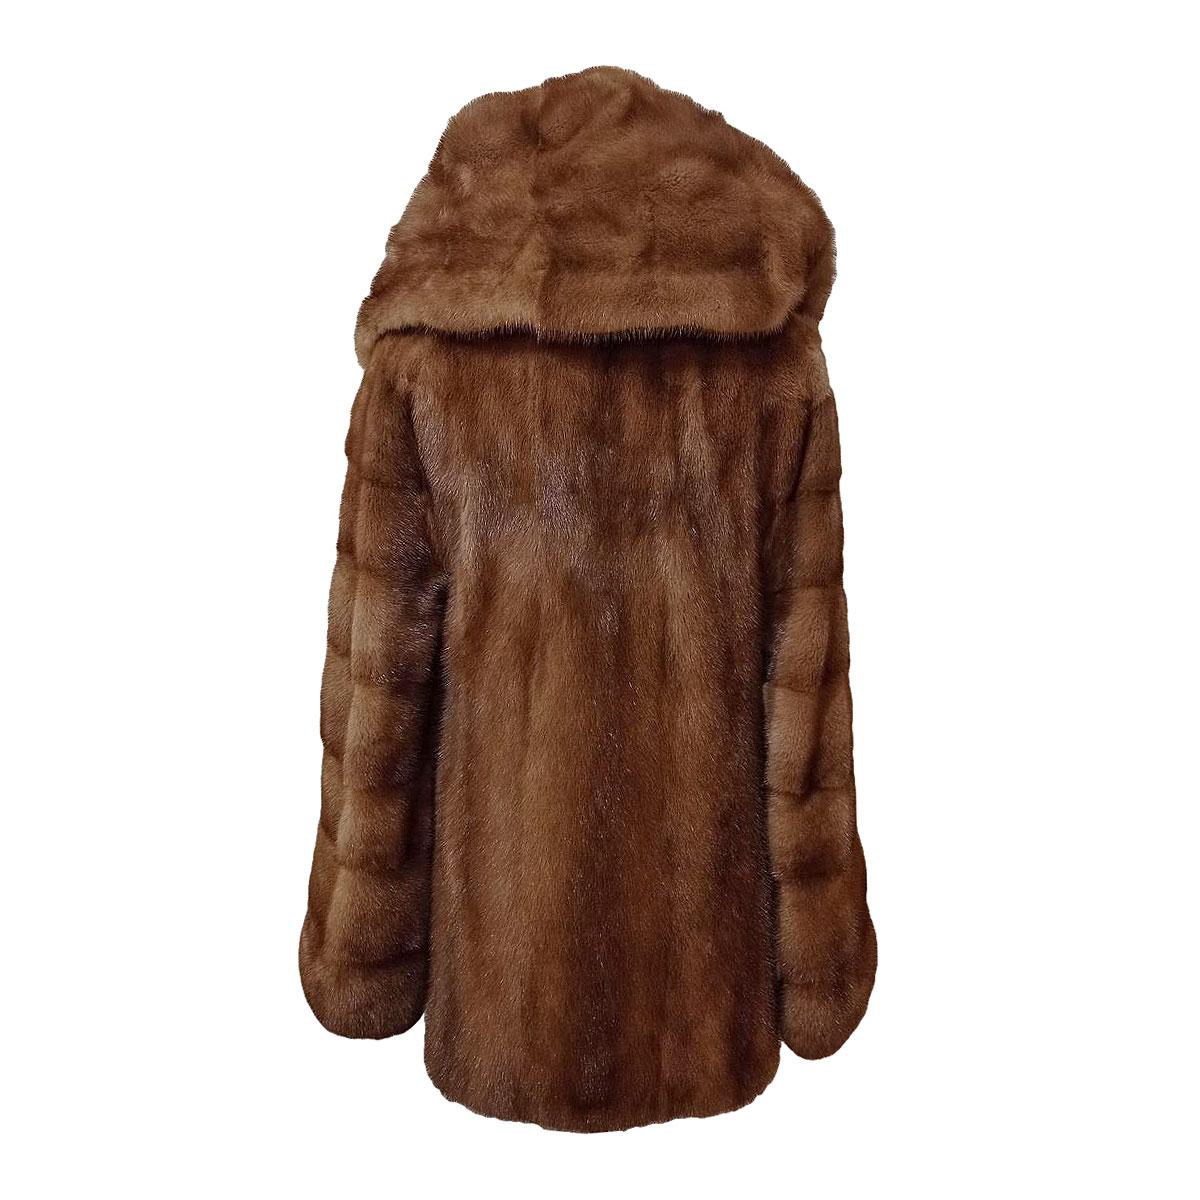 Amazing and top quality mink fur jacket
Real mustela fur
Honey color
With hood
Single button plus hooks
Shoulder length / hem cm 70 (27,5 inches)
Shoulder width cm 44 (17,32 inches)
Large fit
Bought in Dubai
Express international shipping included